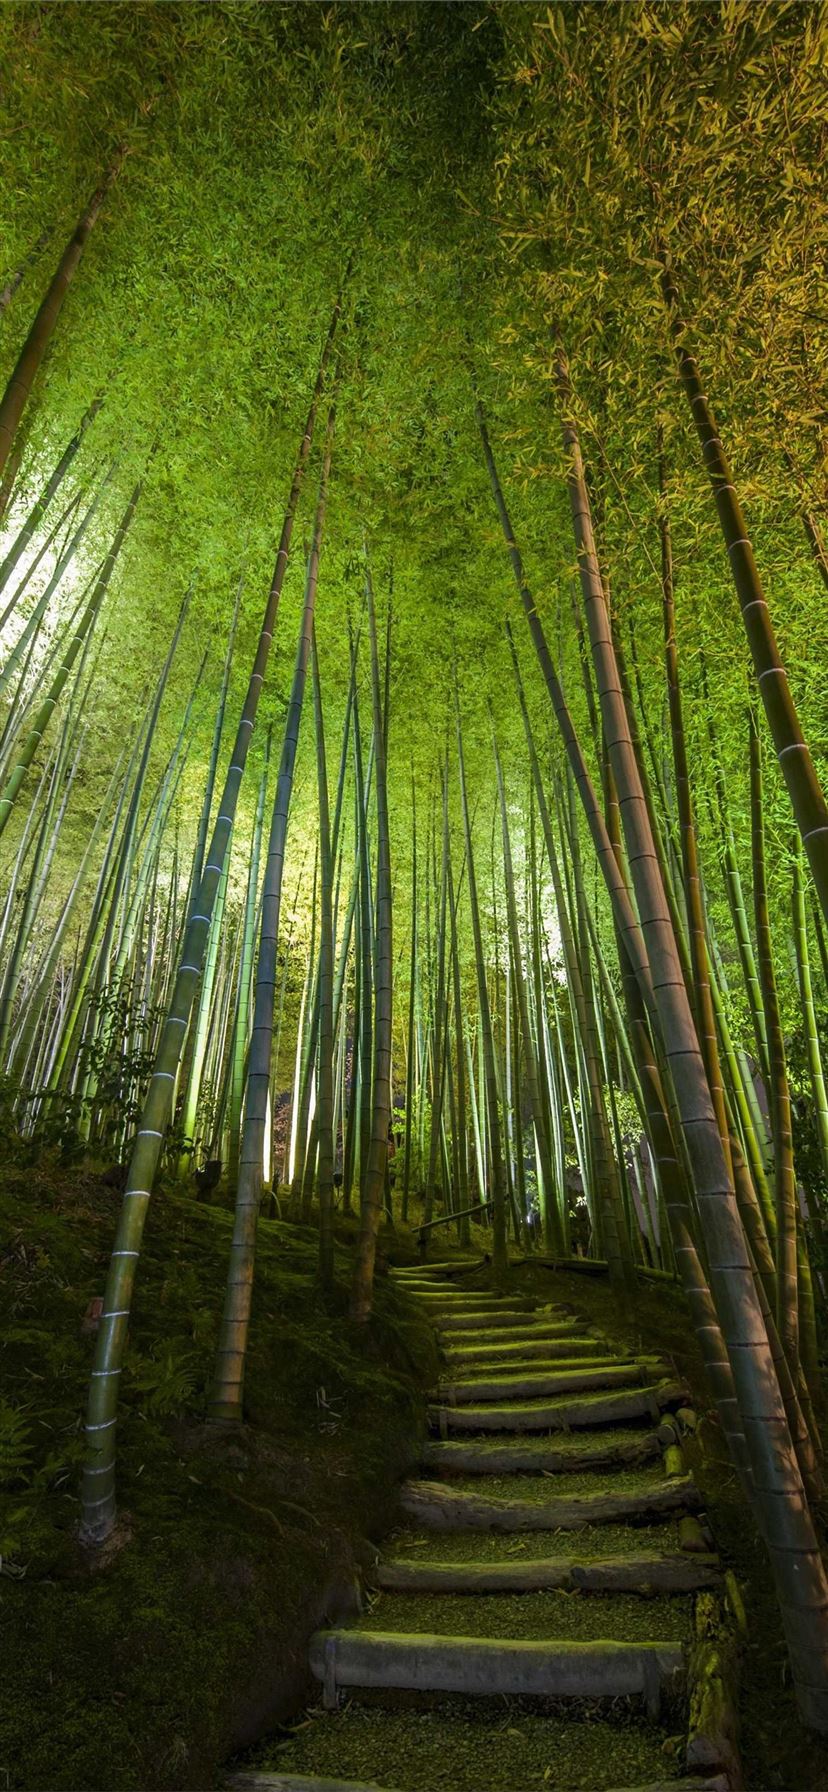 Sagano Bamboo Forest iPhone 11 Wallpaper Free Download